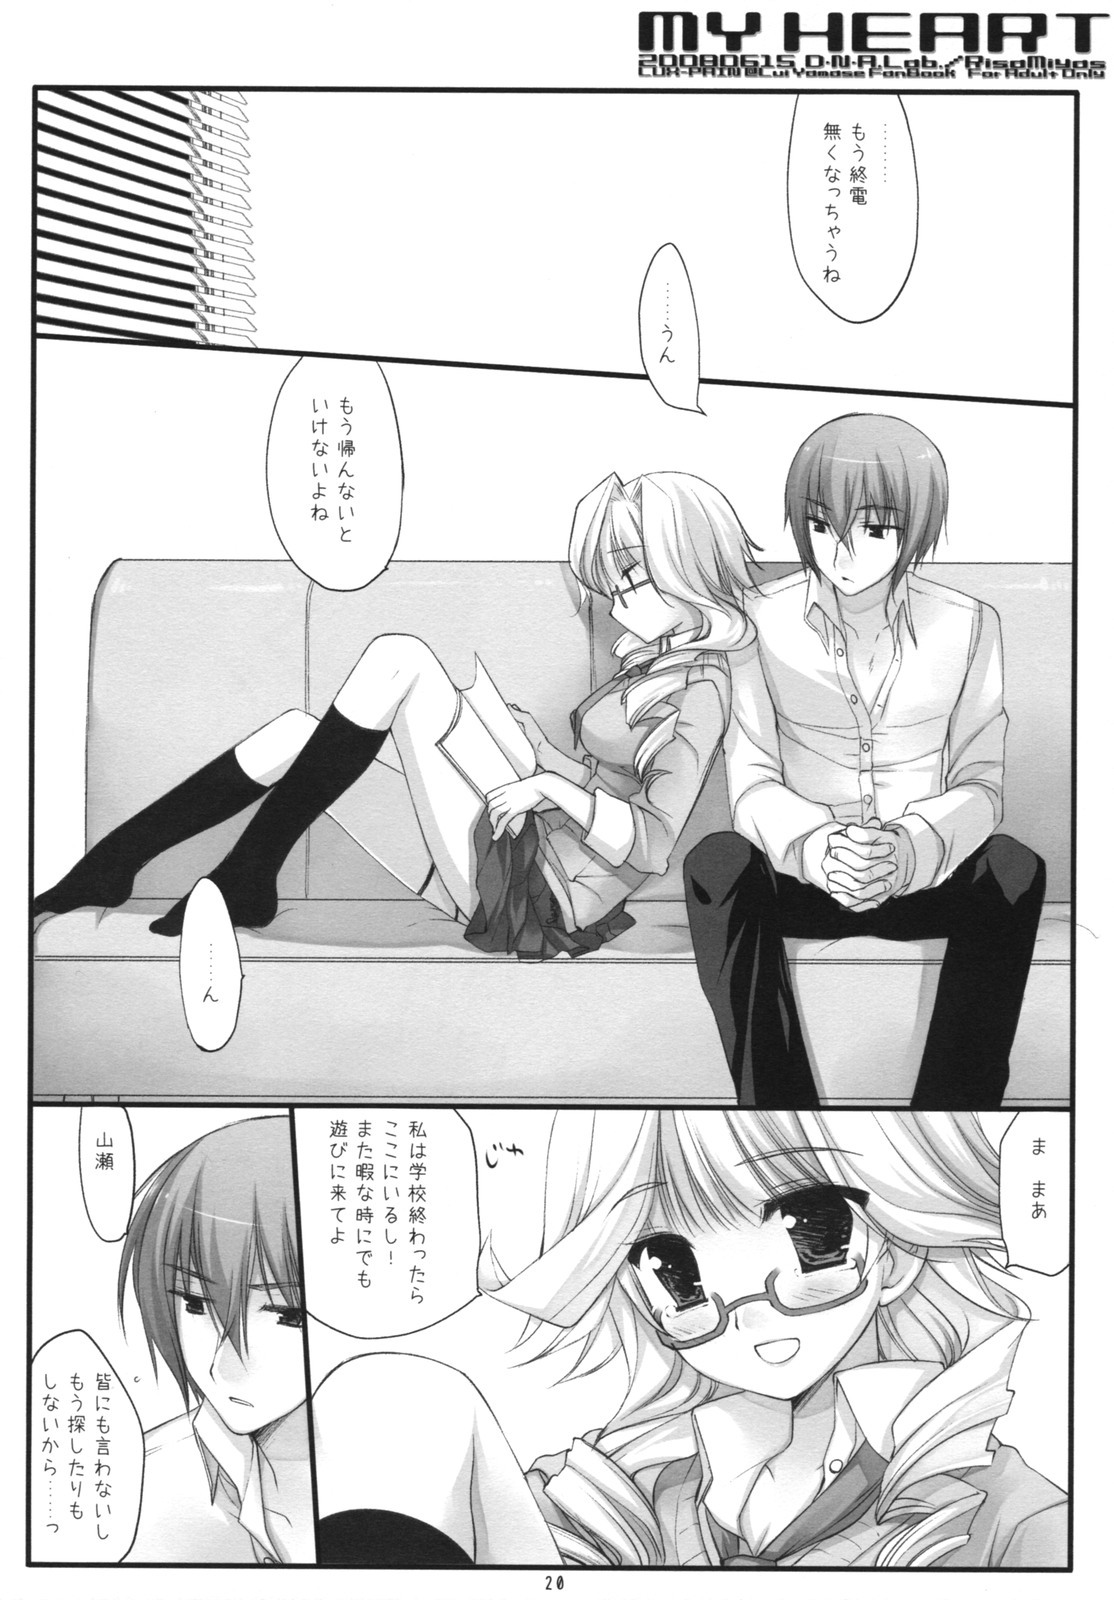 (SC40) [D.N.A.Lab. (Miyasu Risa)] MY HEART (LUX-PAIN) page 19 full